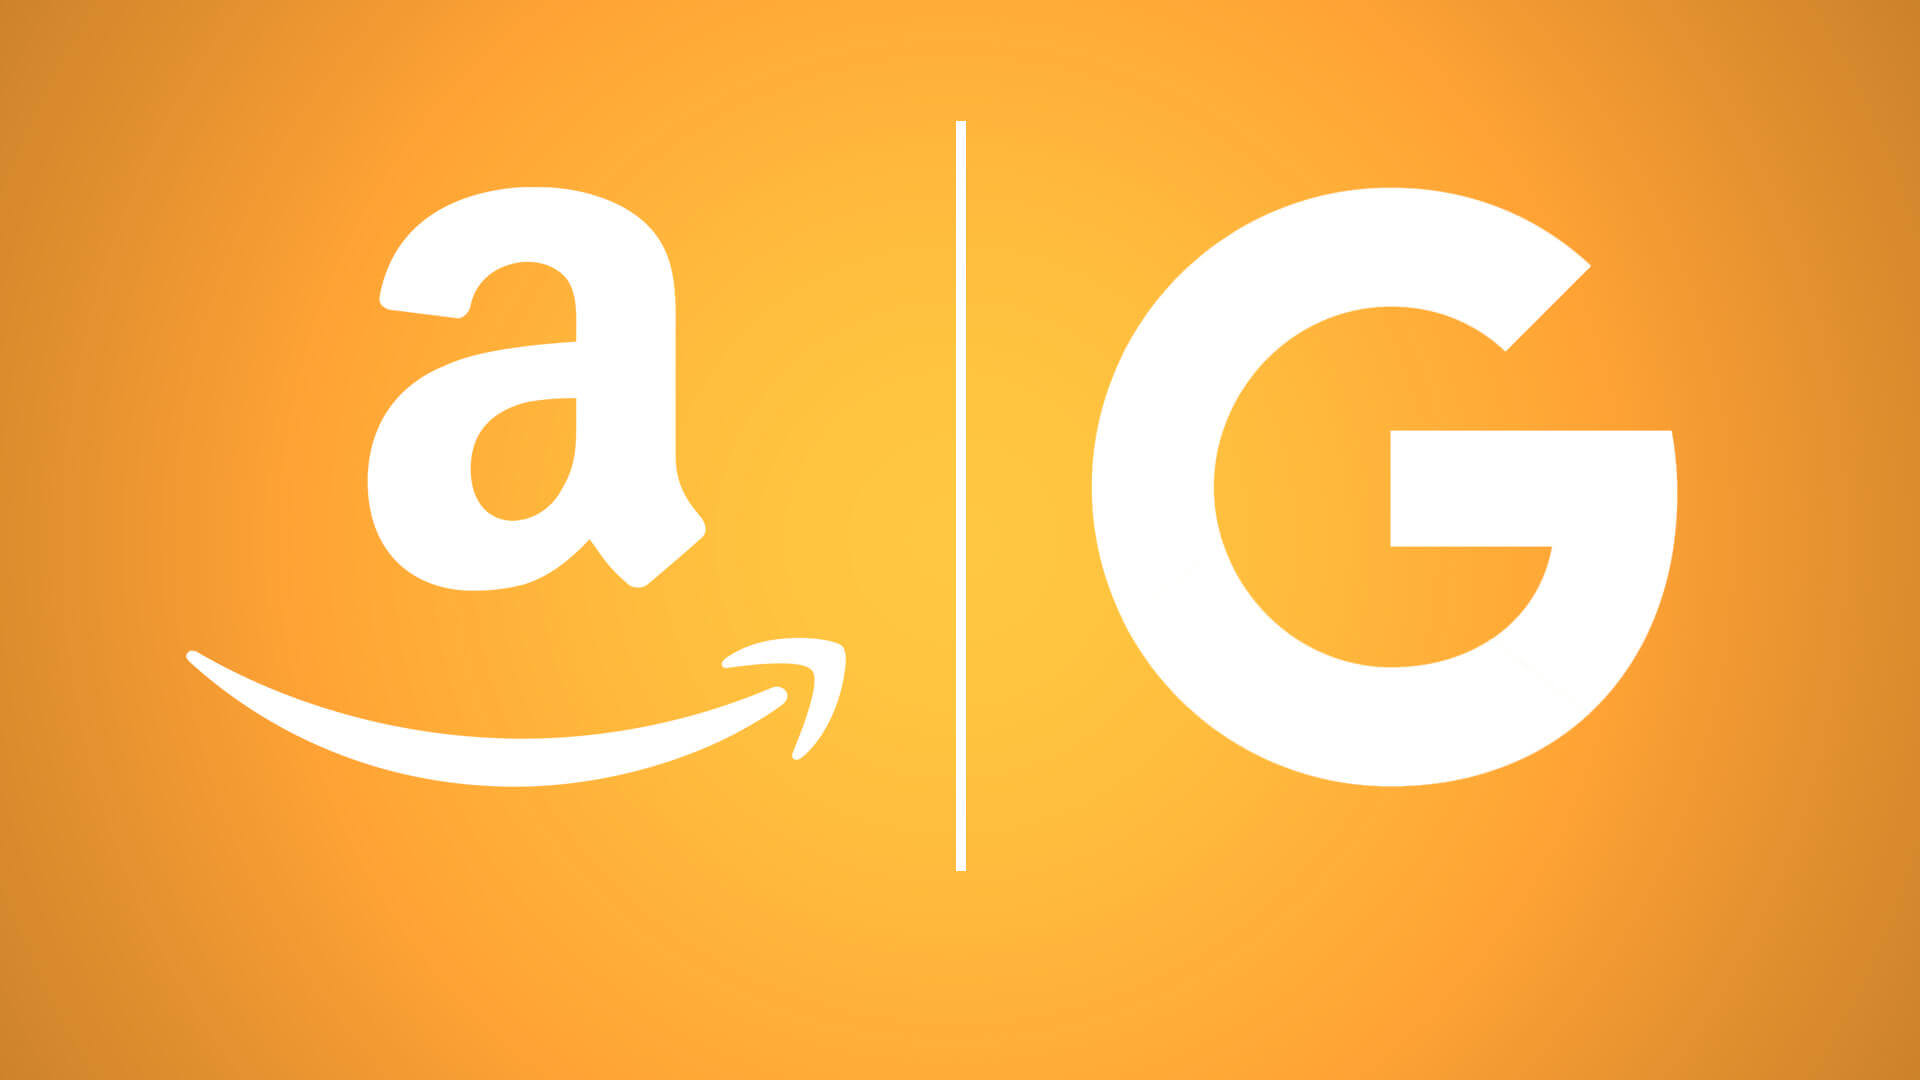 Amazon strikes pioneering deal with UK publisher in response to third-party cookie deprecation